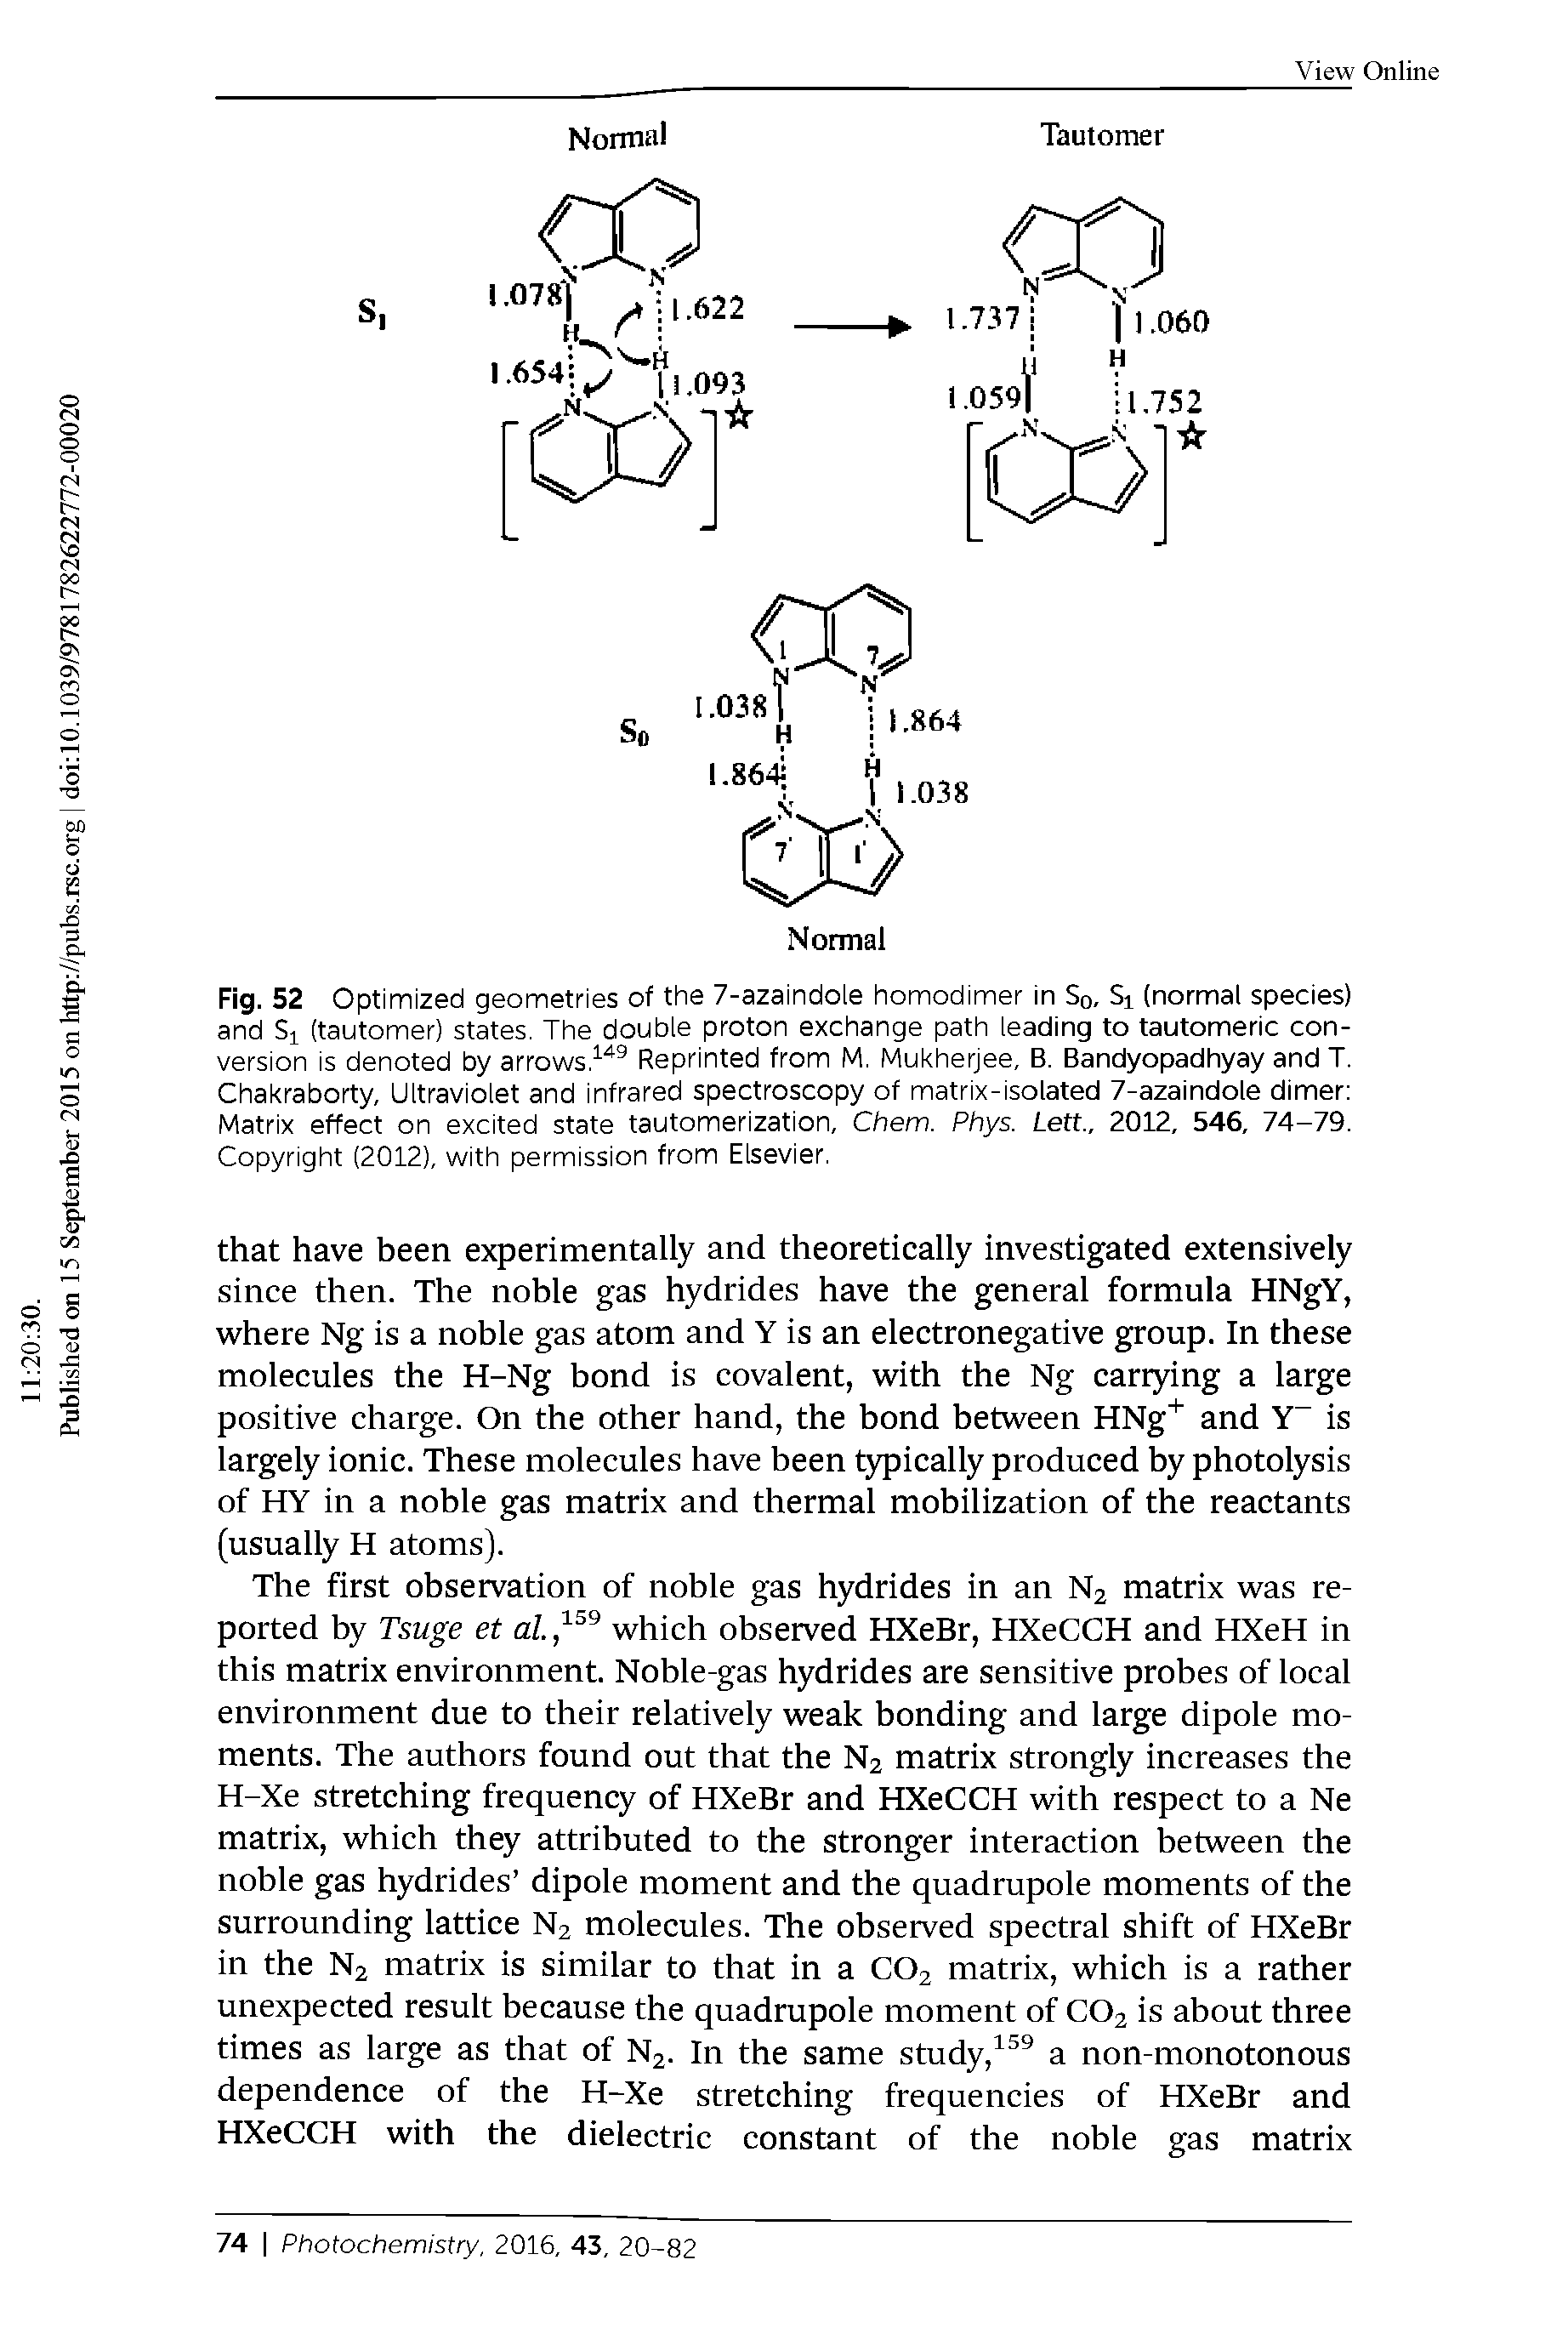 Fig. 52 Optimized geometries of the 7-azaindole homodimer in So, Si (normal species) and Si (tautomer) states The double proton exchange path leading to tautomeric conversion is denoted by arrows,Reprinted from M, Mukherjee, B. Bandyopadhyay and T. Chakraborty Ultraviolet and infrared spectroscopy of matrix-isolated 7-azaindole dimer Matrix effect on excited state tautomerization, Chem. Phys. Lett., 2012. 546. 74-79. Copyright (2012), with permission from Elsevier,...